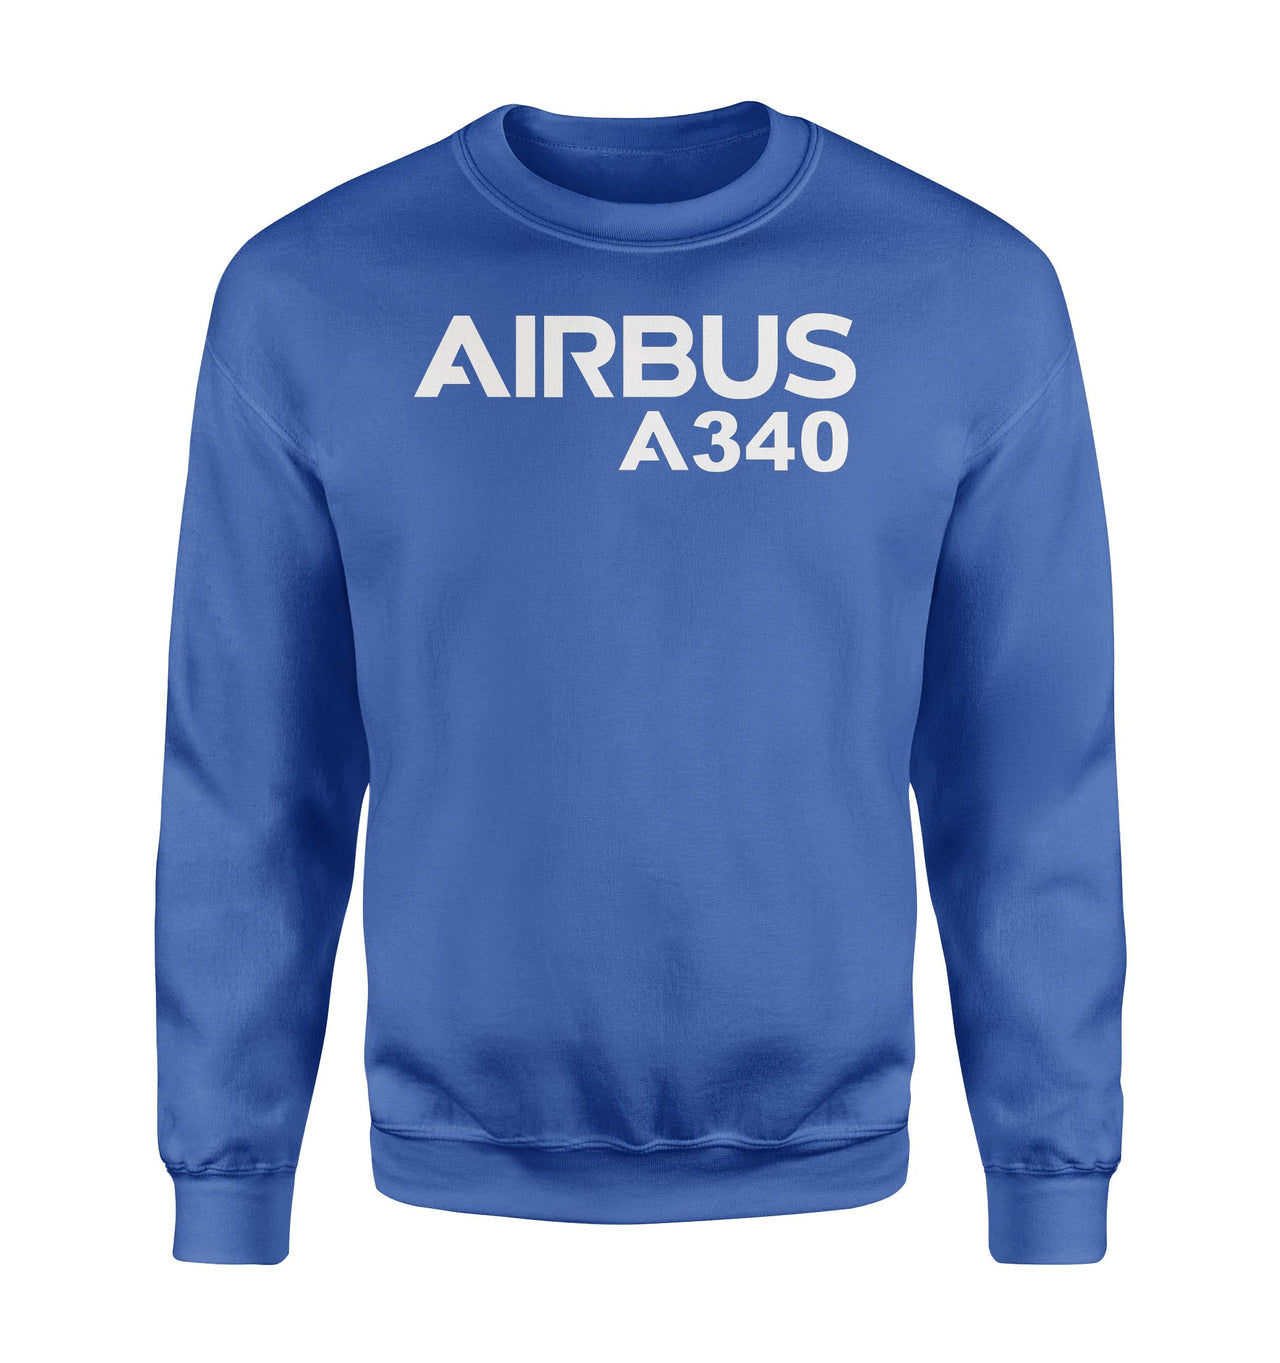 Airbus A340 & Text Designed Sweatshirts